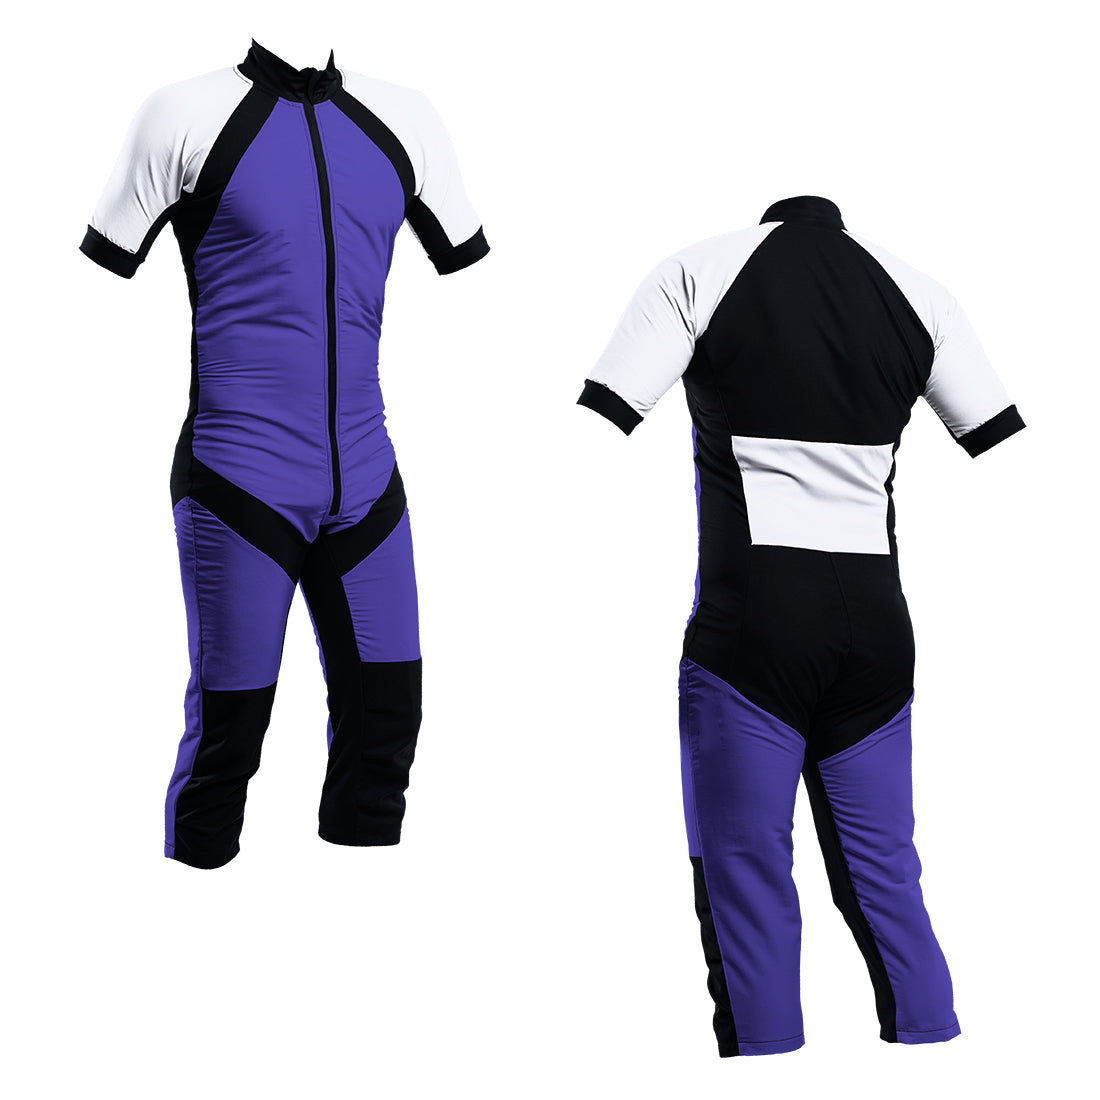 Skydiving Summer Suit Purple-White S2-03